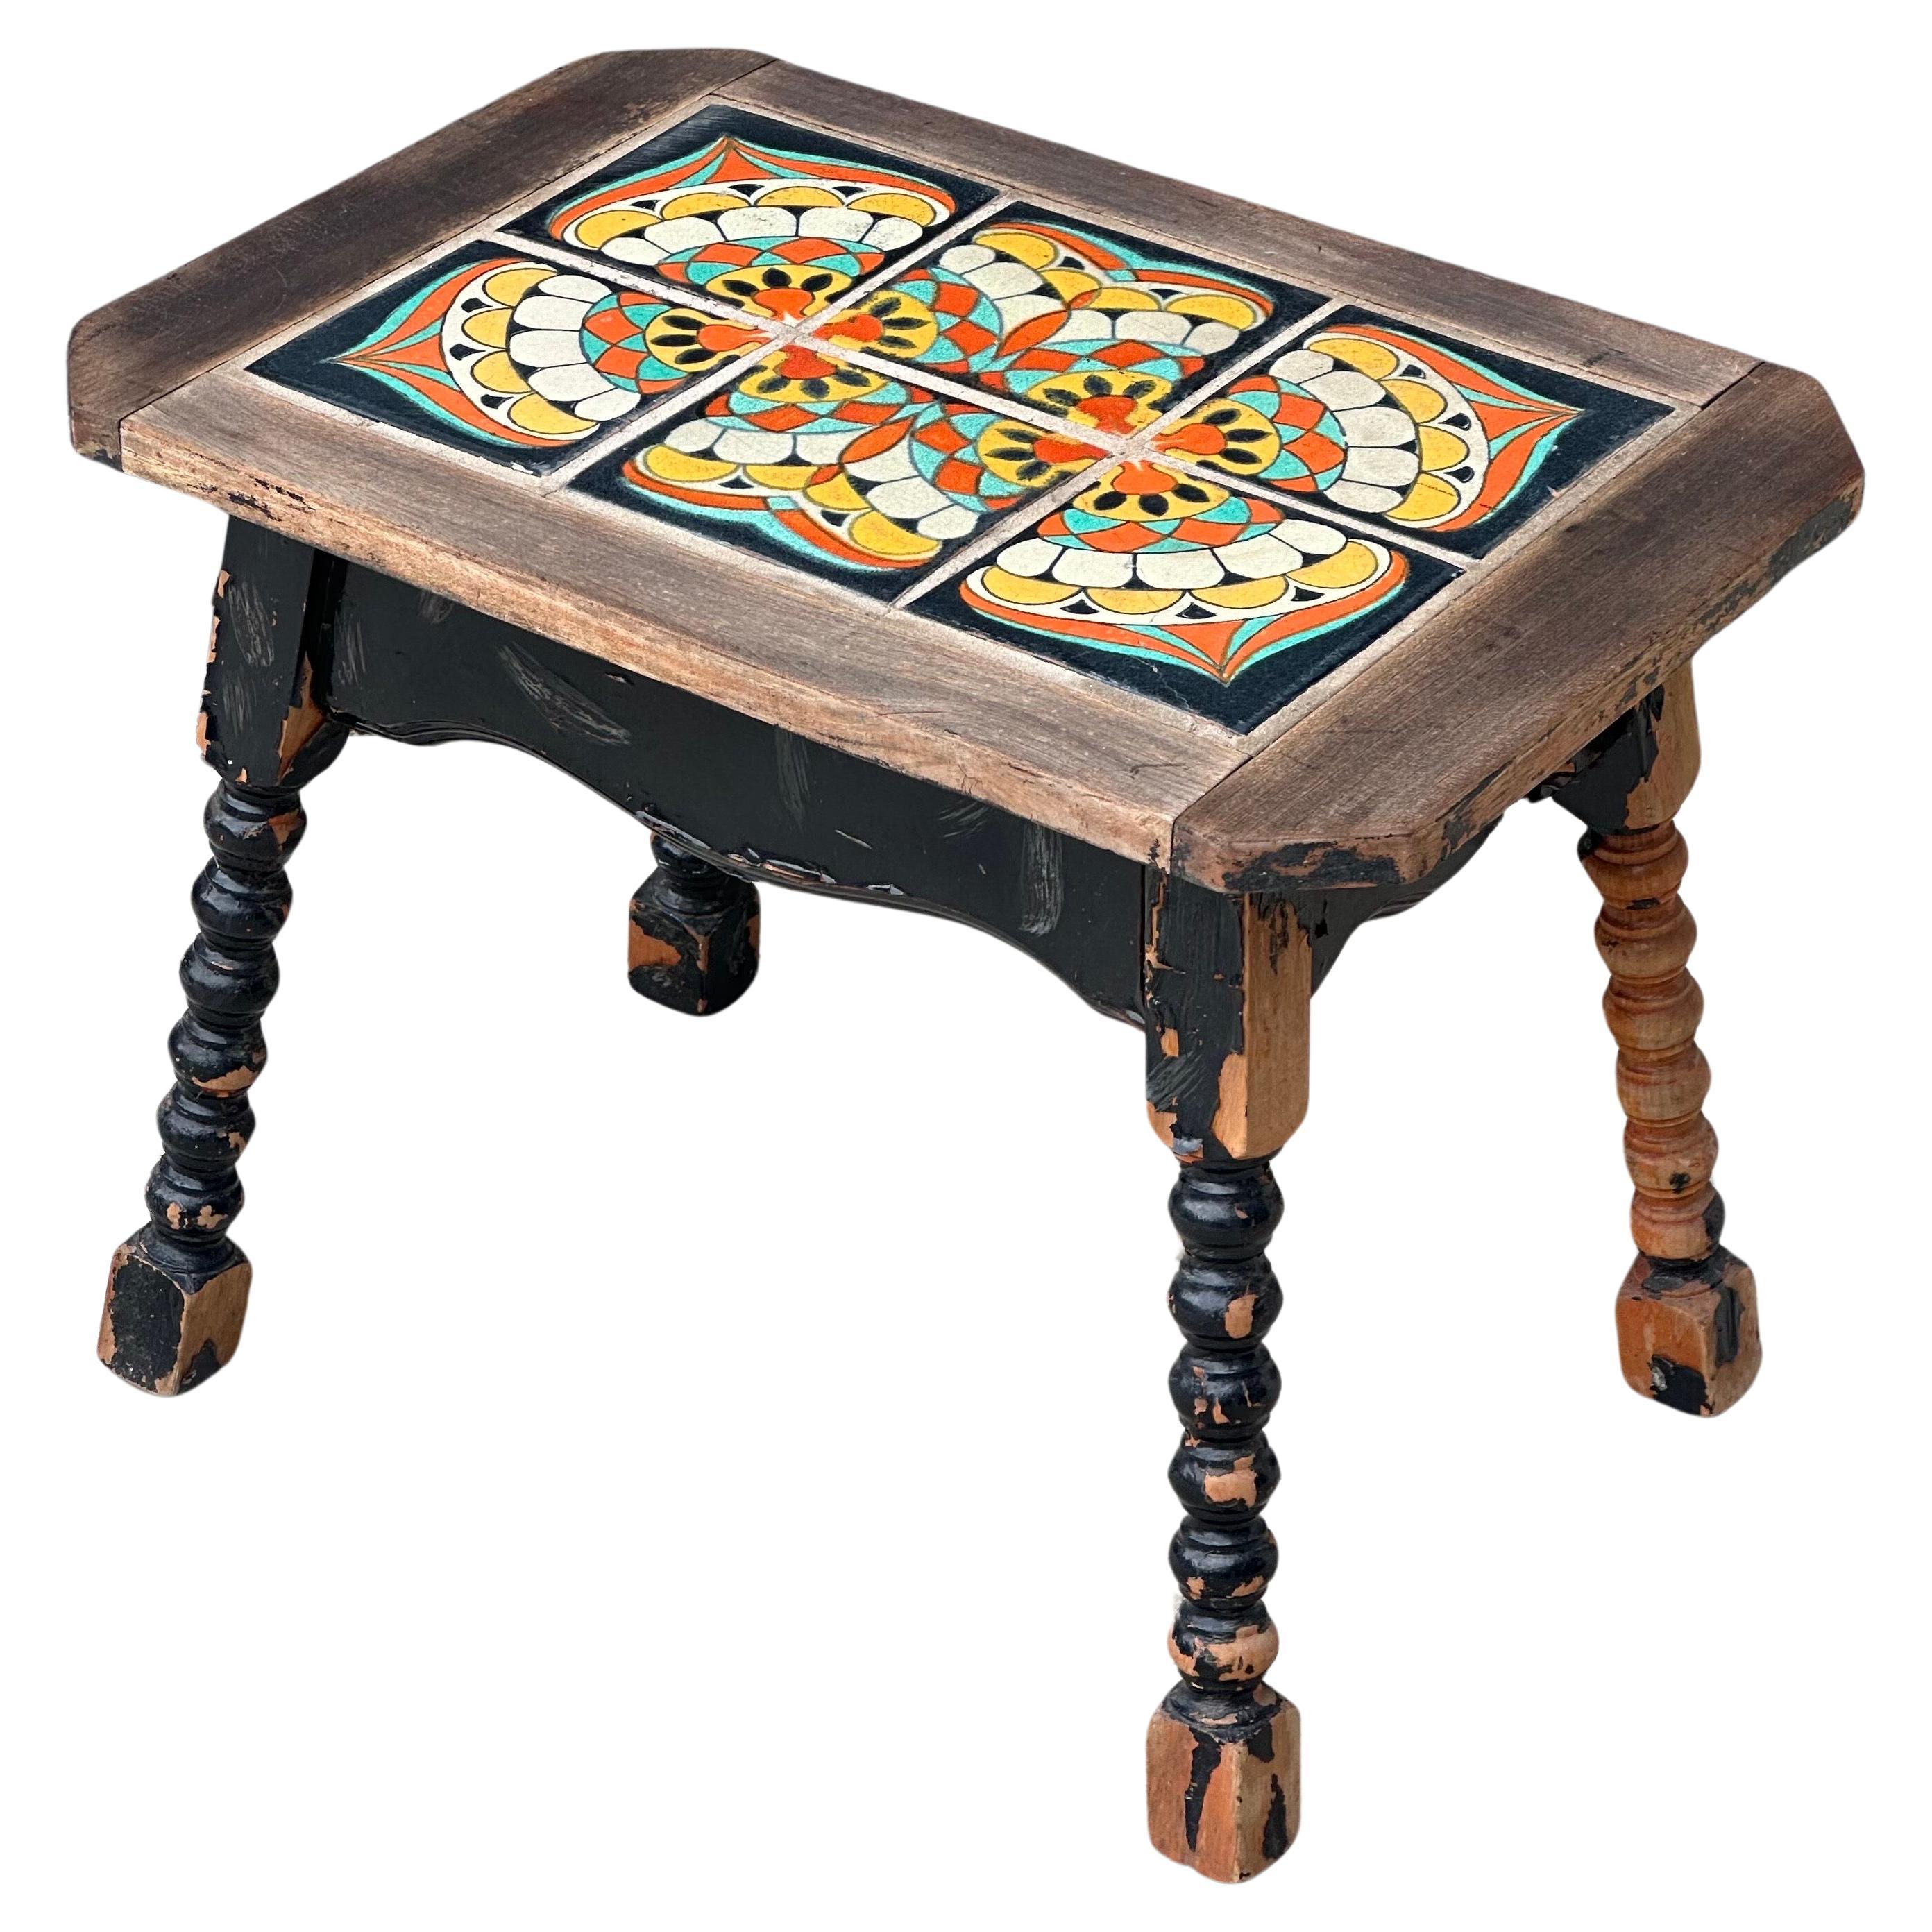 An absolutely exceptional example of an antique Monterey tile topped side table with turned wood legs, circa early 1930s. Completely original, from the 